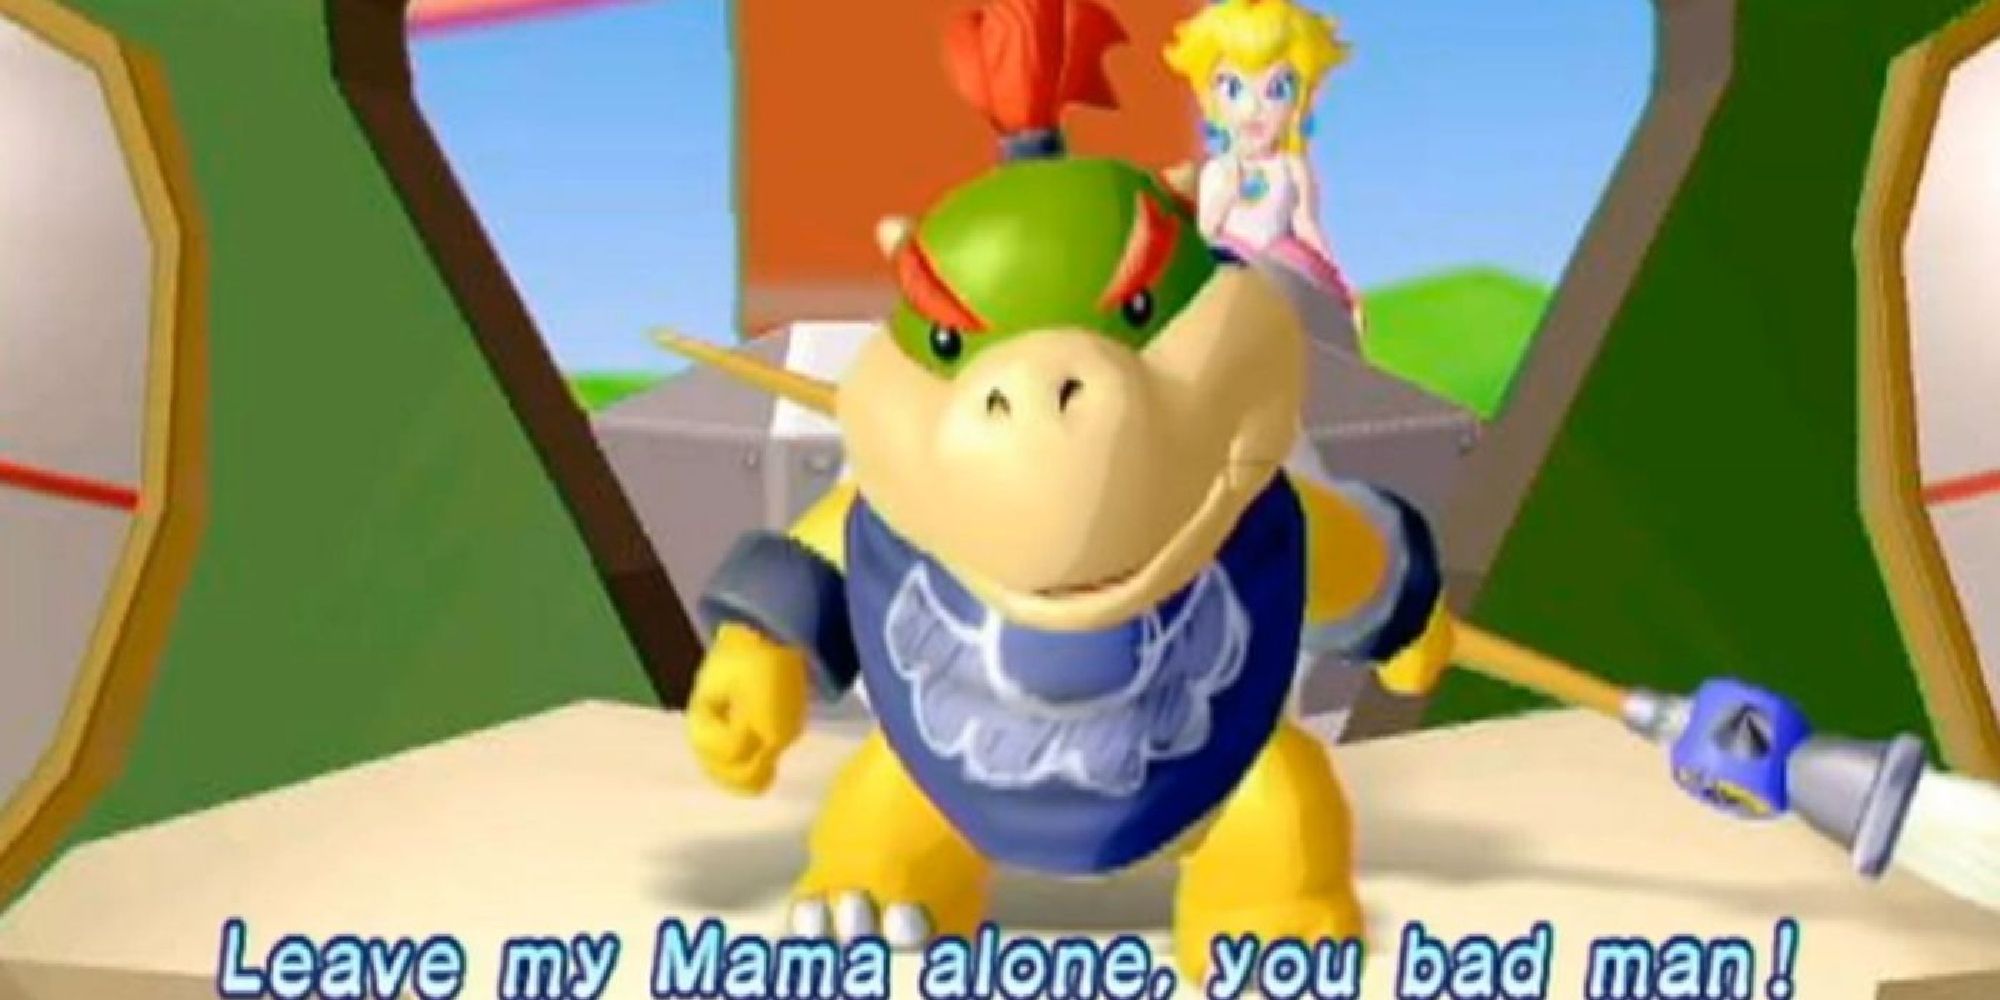 Bowser Junior standing in front of Peach calling her his "Mama"